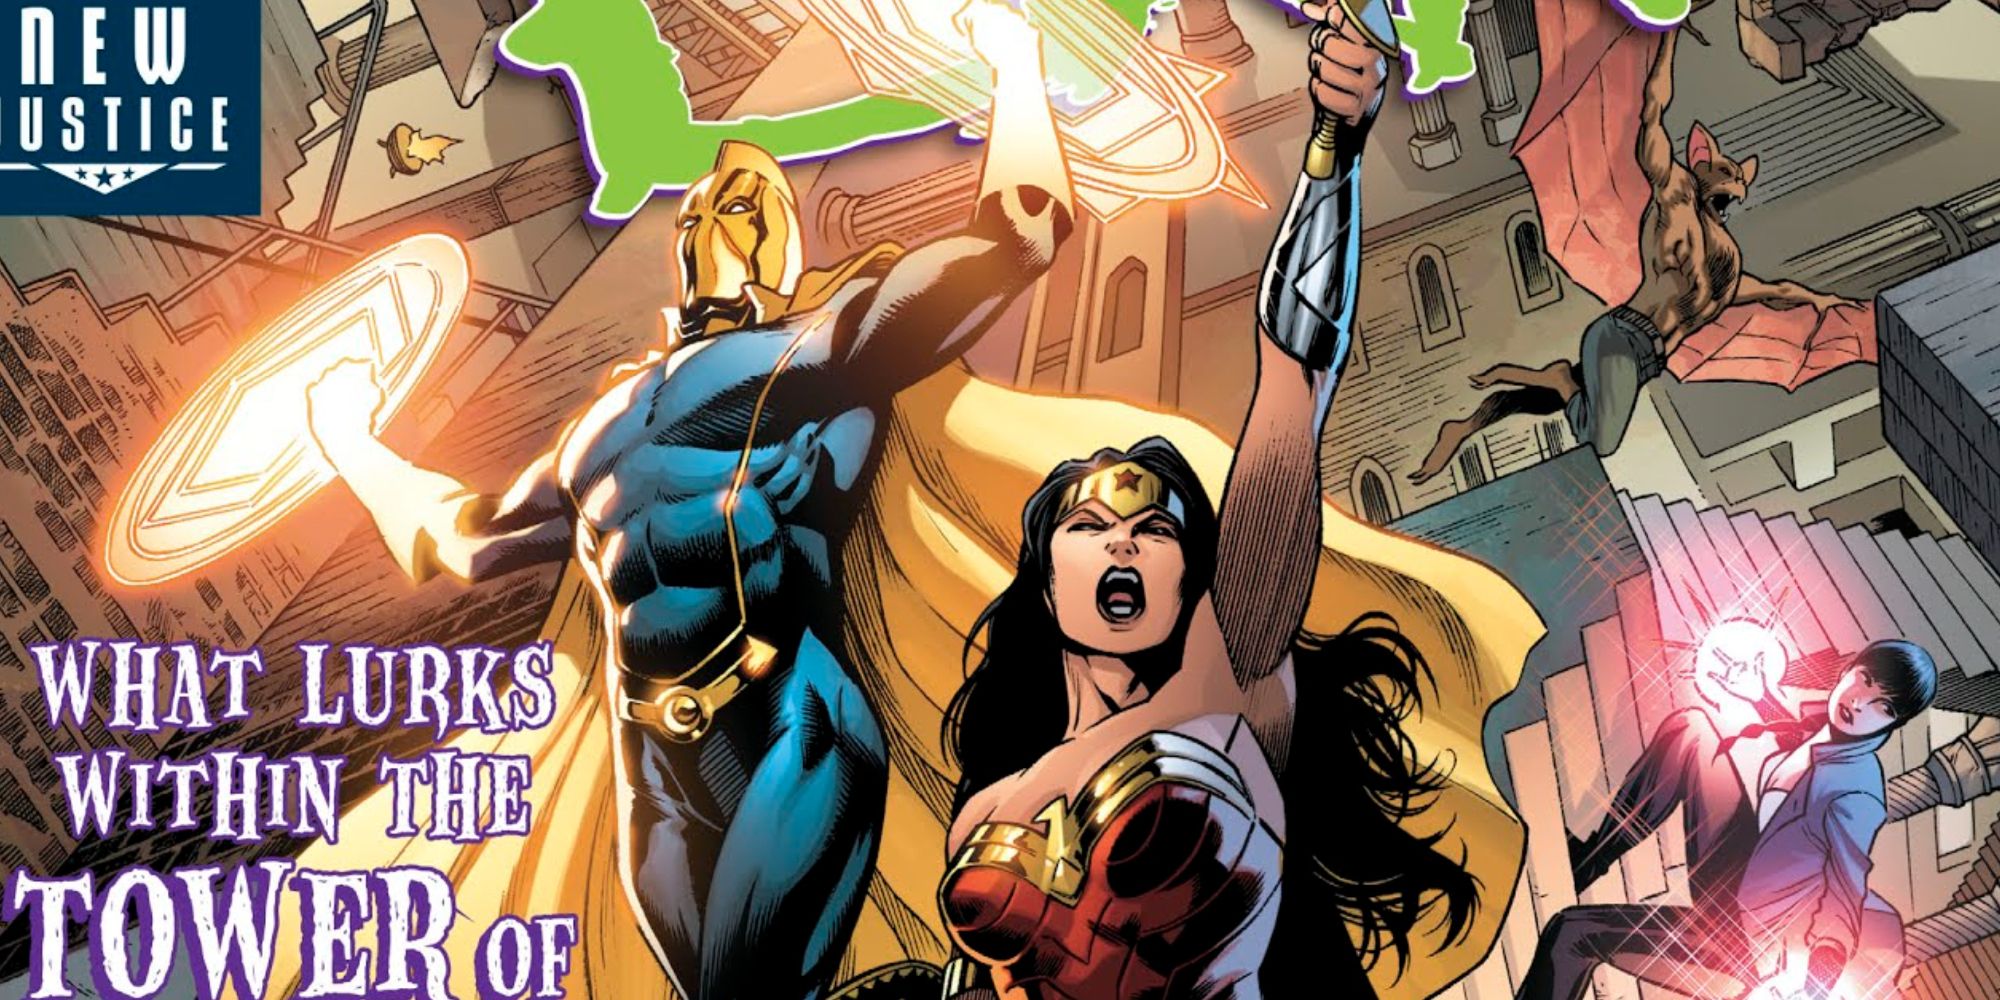 Doctor Fate and Wonder Woman fight in DC Comics.